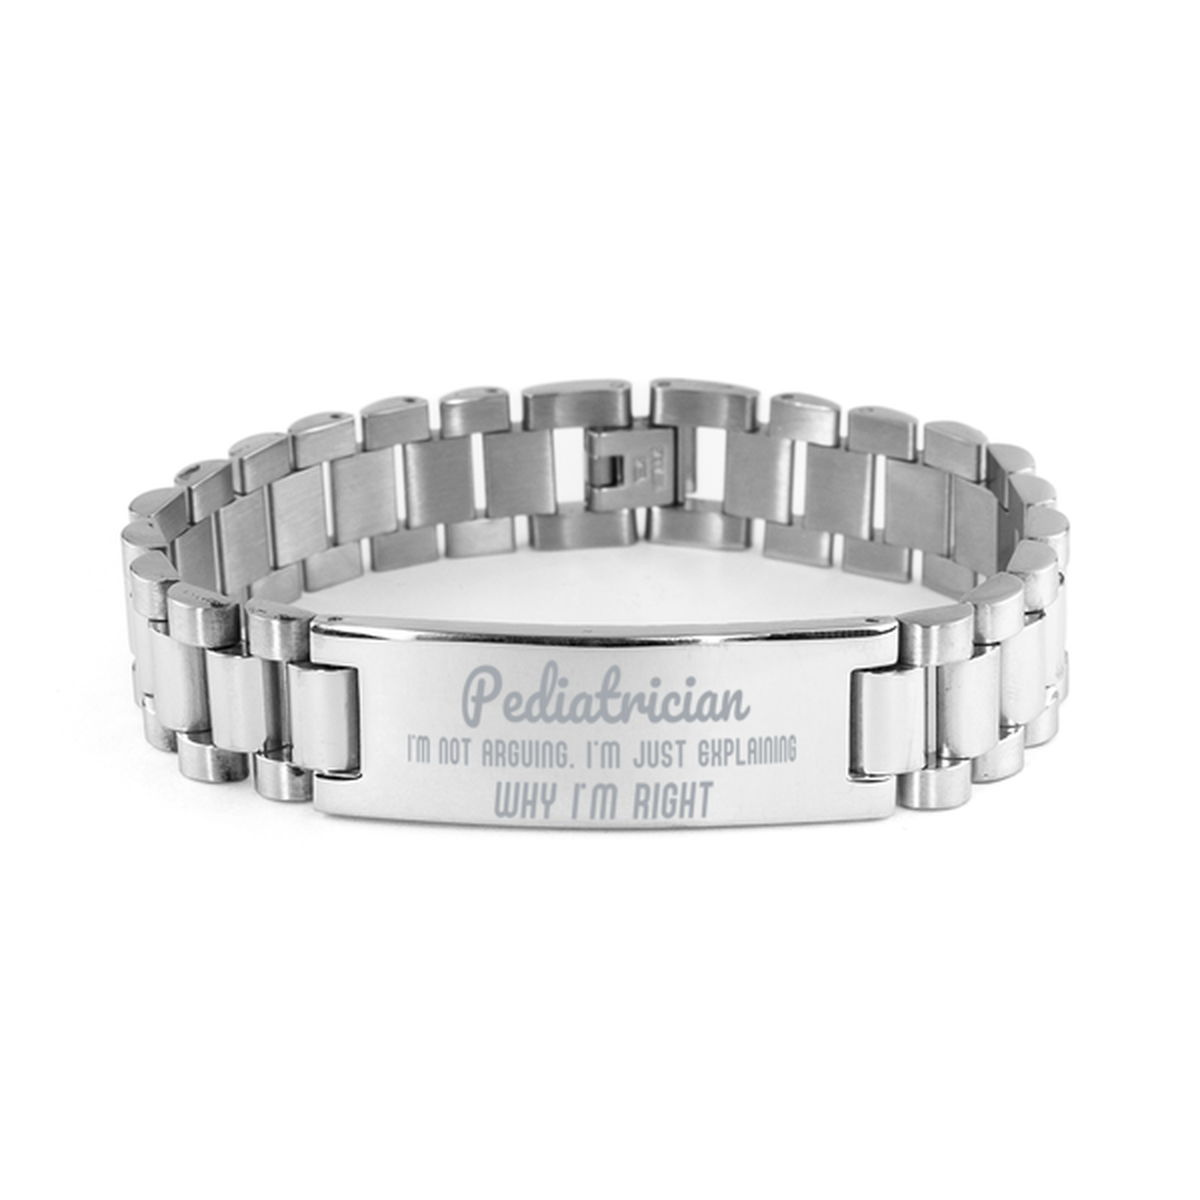 Pediatrician I'm not Arguing. I'm Just Explaining Why I'm RIGHT Ladder Stainless Steel Bracelet, Graduation Birthday Christmas Pediatrician Gifts For Pediatrician Funny Saying Quote Present for Men Women Coworker